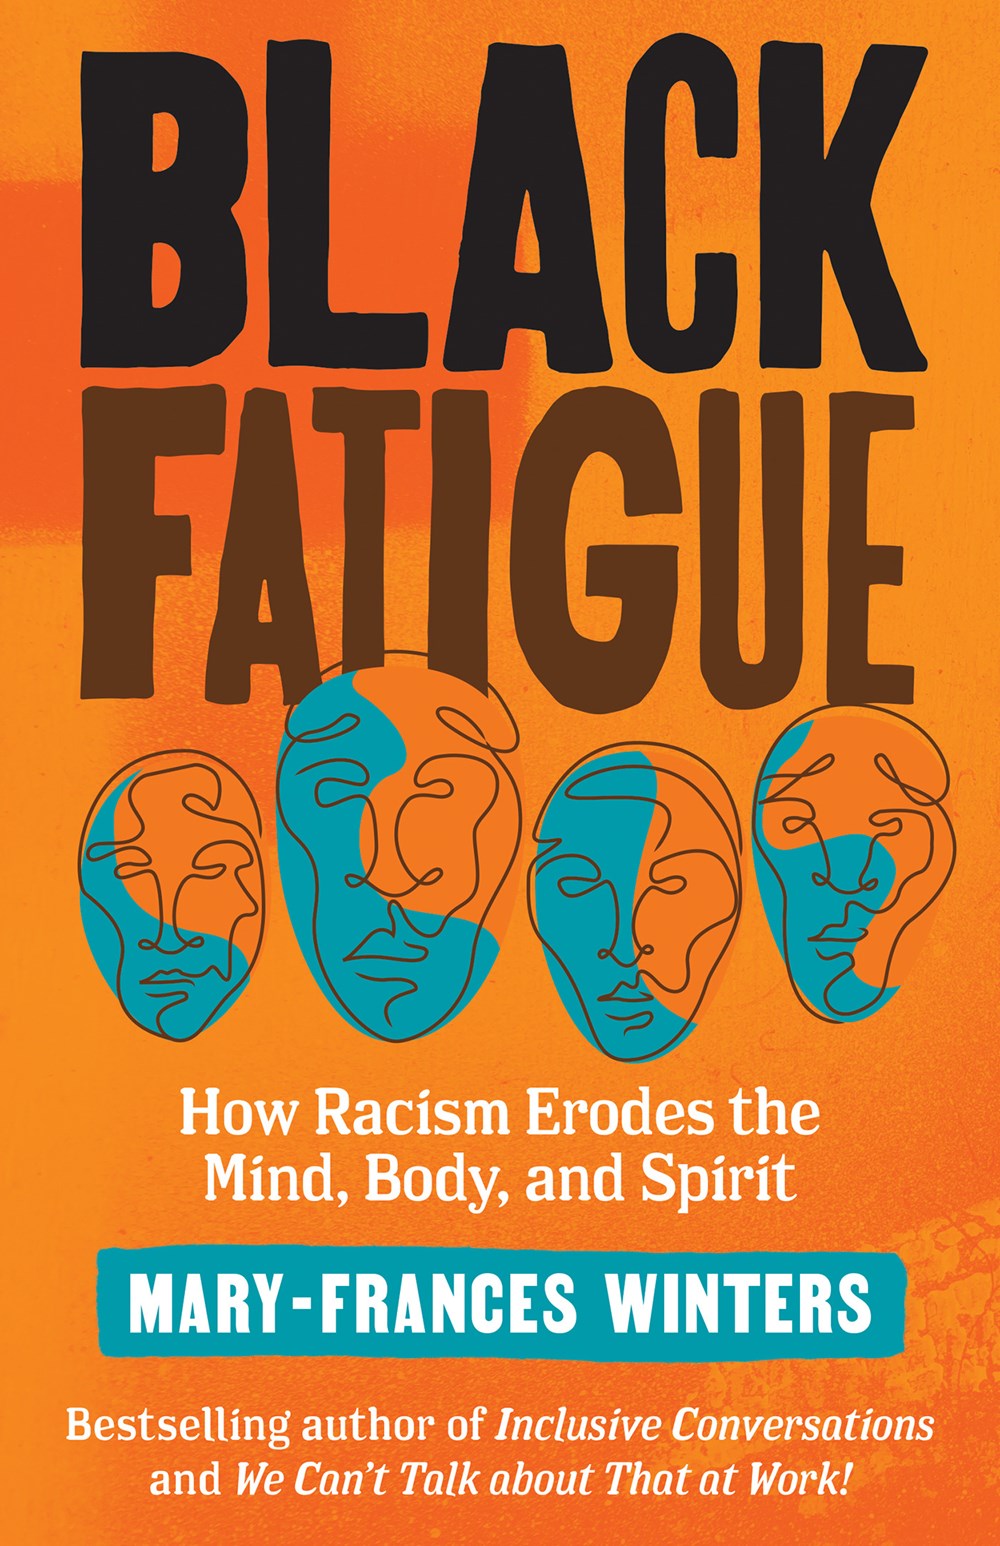 Black Fatigue : How Racism Erodes the Mind, Body, and Spirit